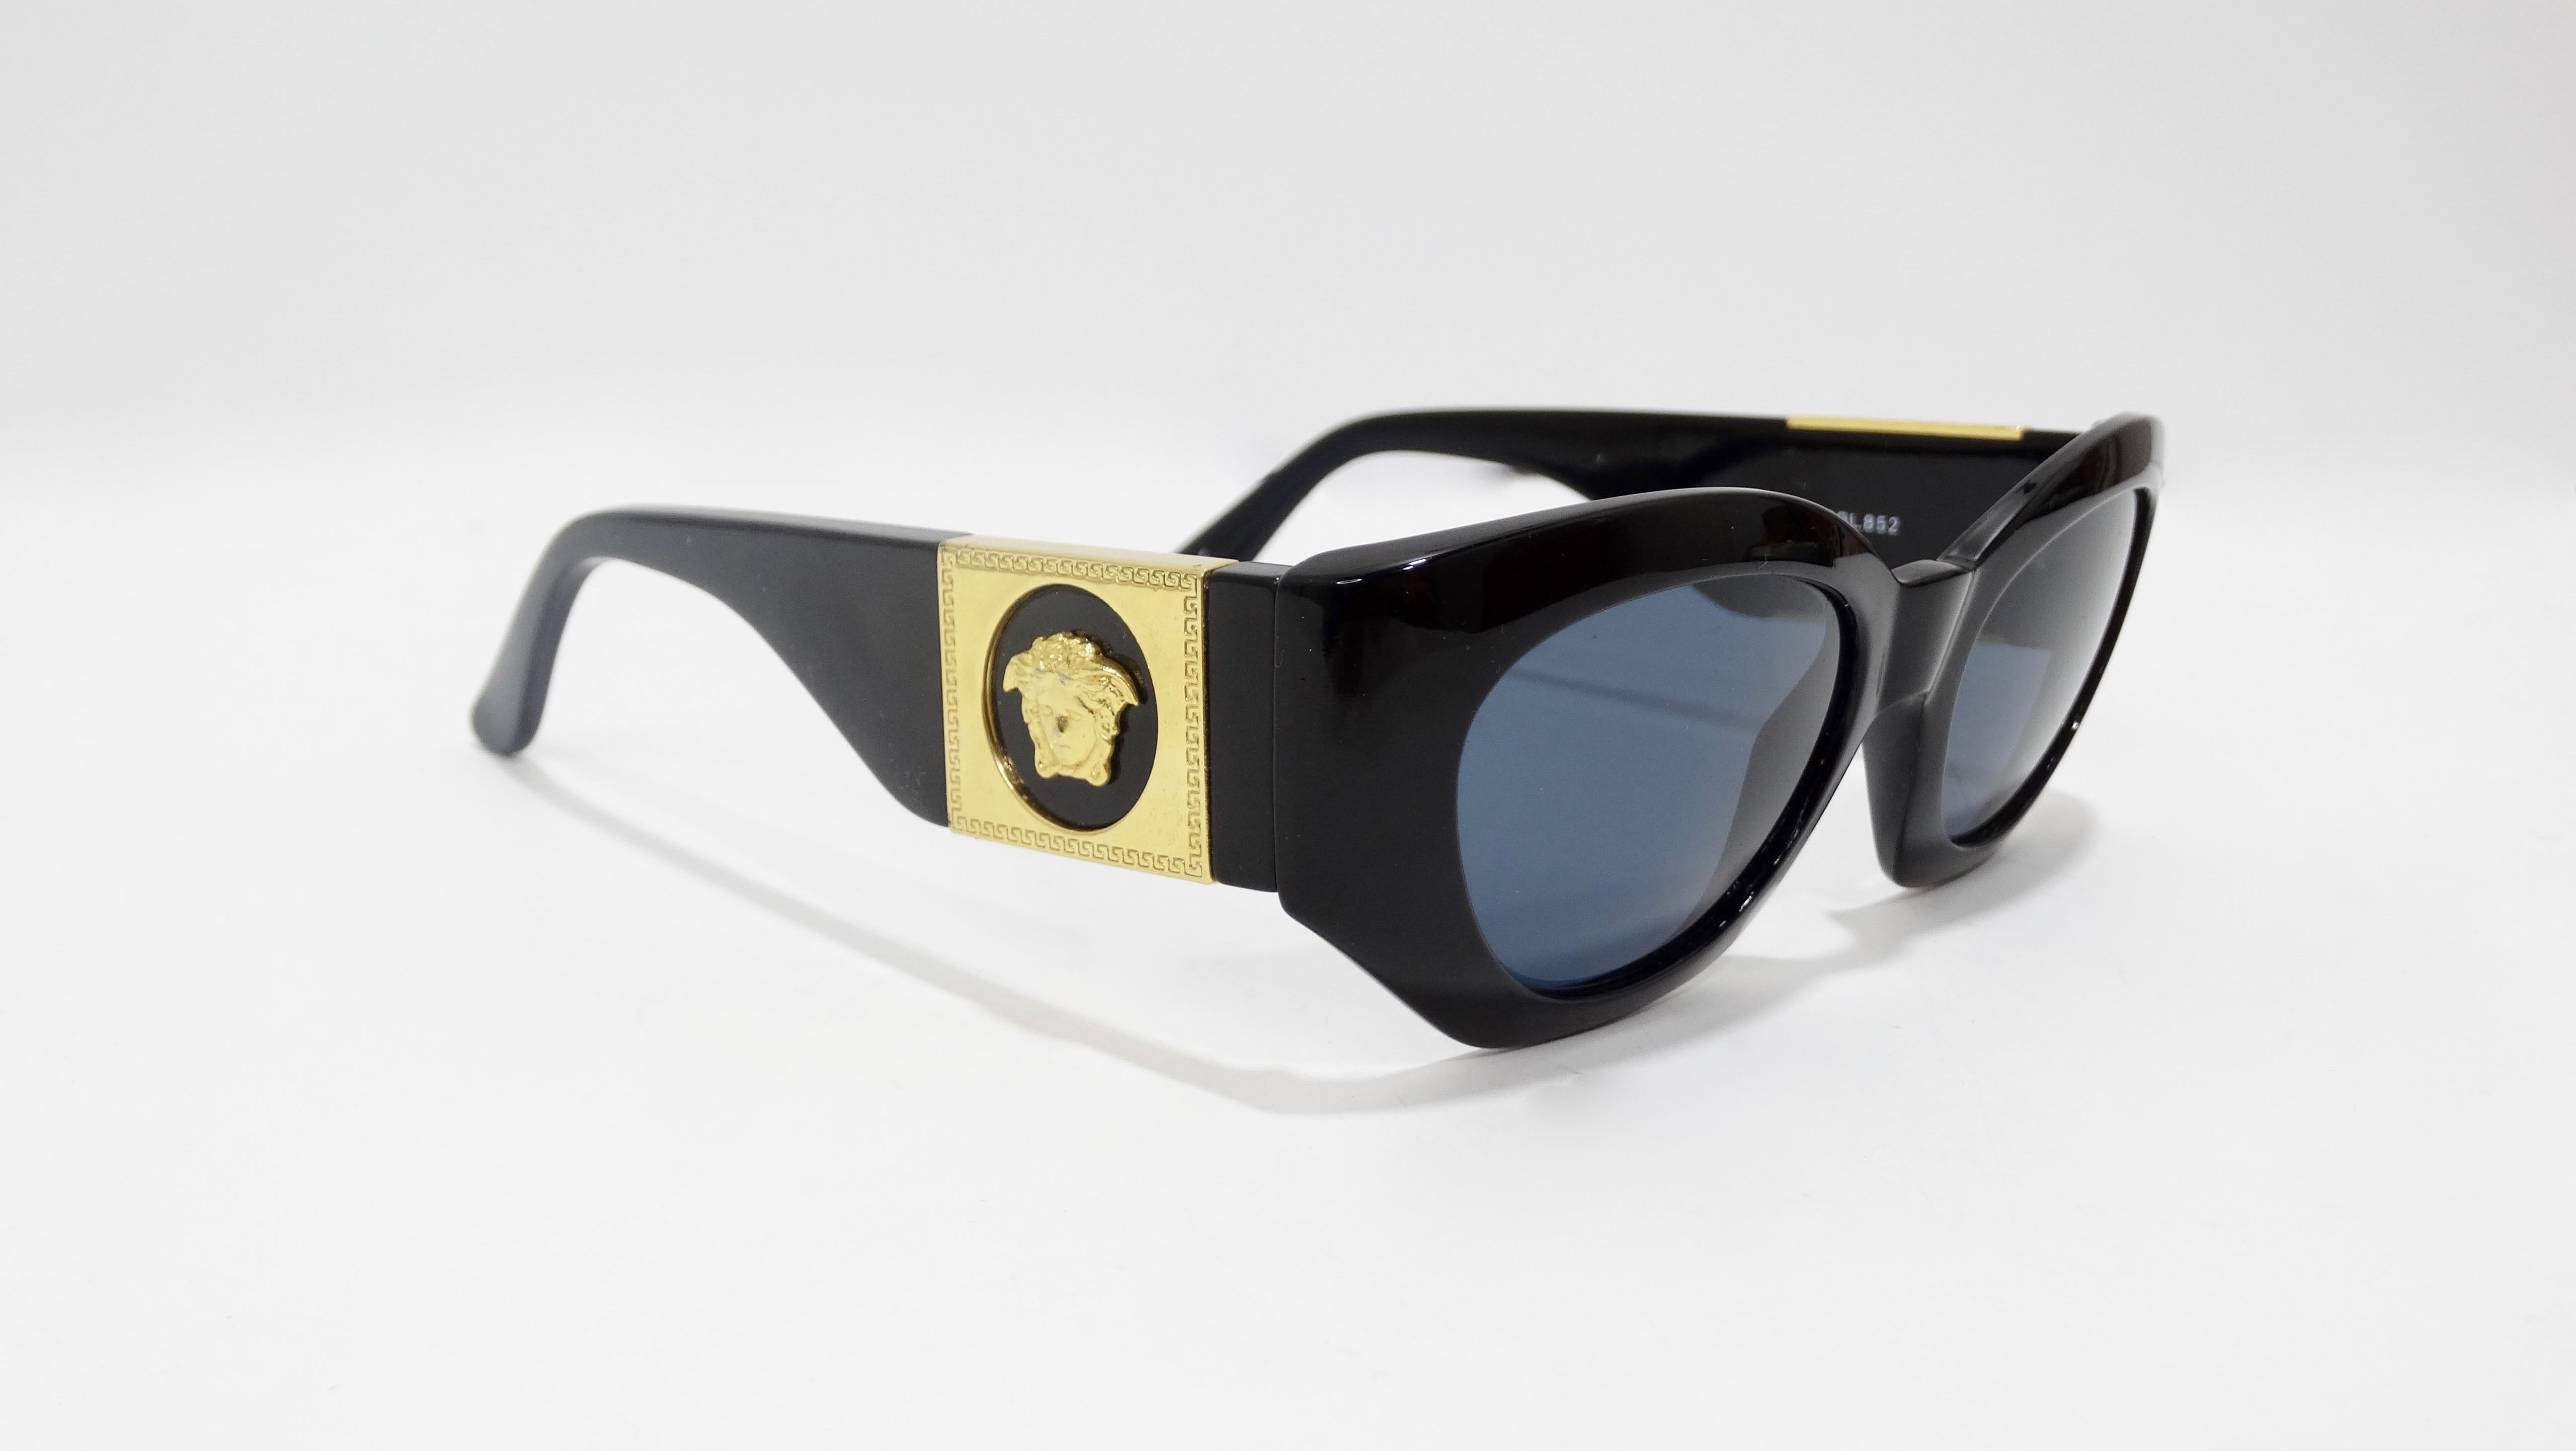 Your new everyday sunnies are here! Circa late 1980s, these Versace sunglasses feature a black frame, dark blue lenses, and a subtle cat eye shape. On both arms are gold toned Medusa heads with the signature Greek key. Signed Gianni Versace Made in